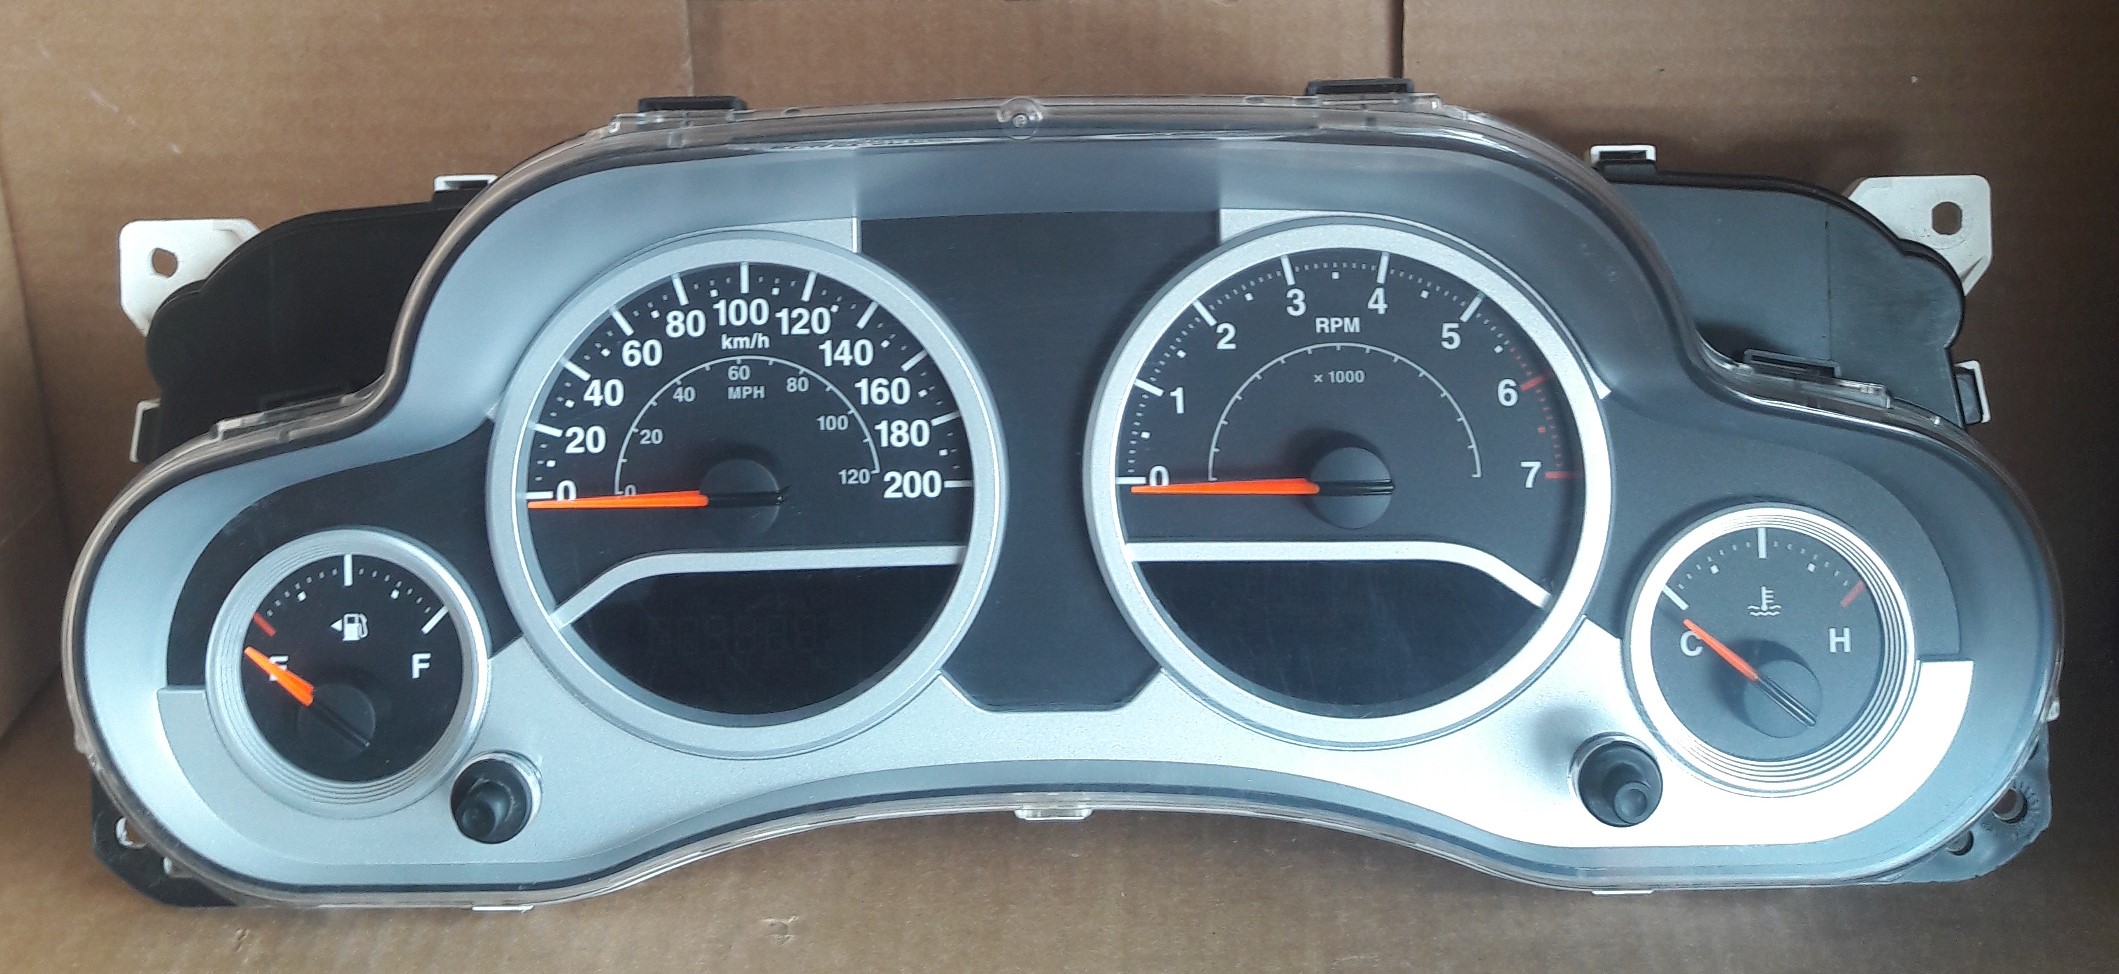 2007-2010 JEEP WRANGLER USED DASHBOARD INSTRUMENT CLUSTER FOR SALE (KM/H) - DASHBOARD  INSTRUMENT CLUSTER